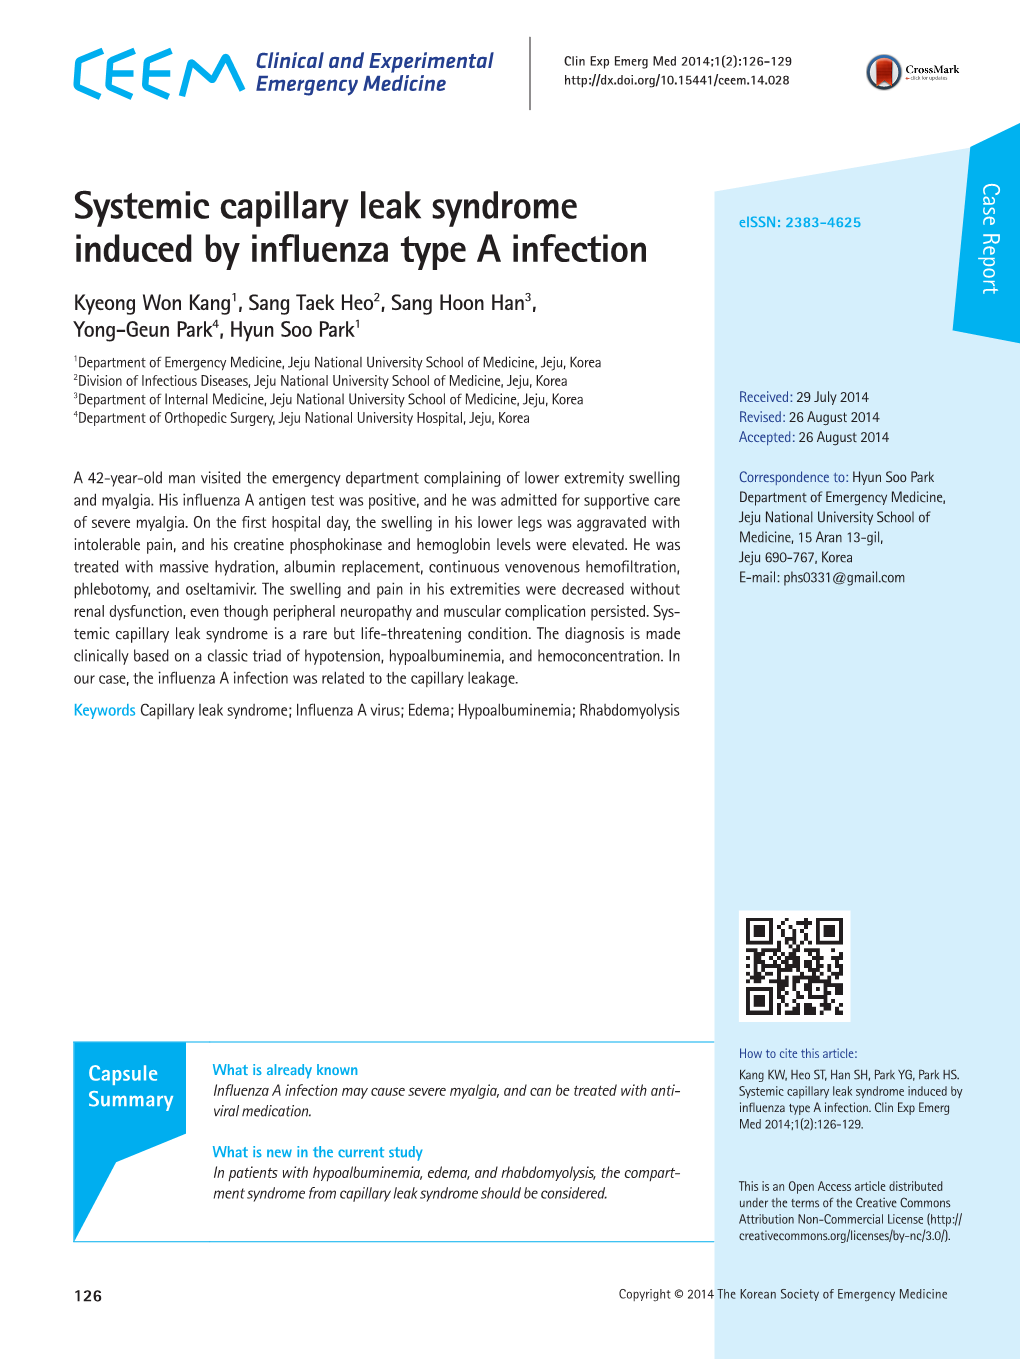 Systemic Capillary Leak Syndrome Induced by Influenza Type a Infection